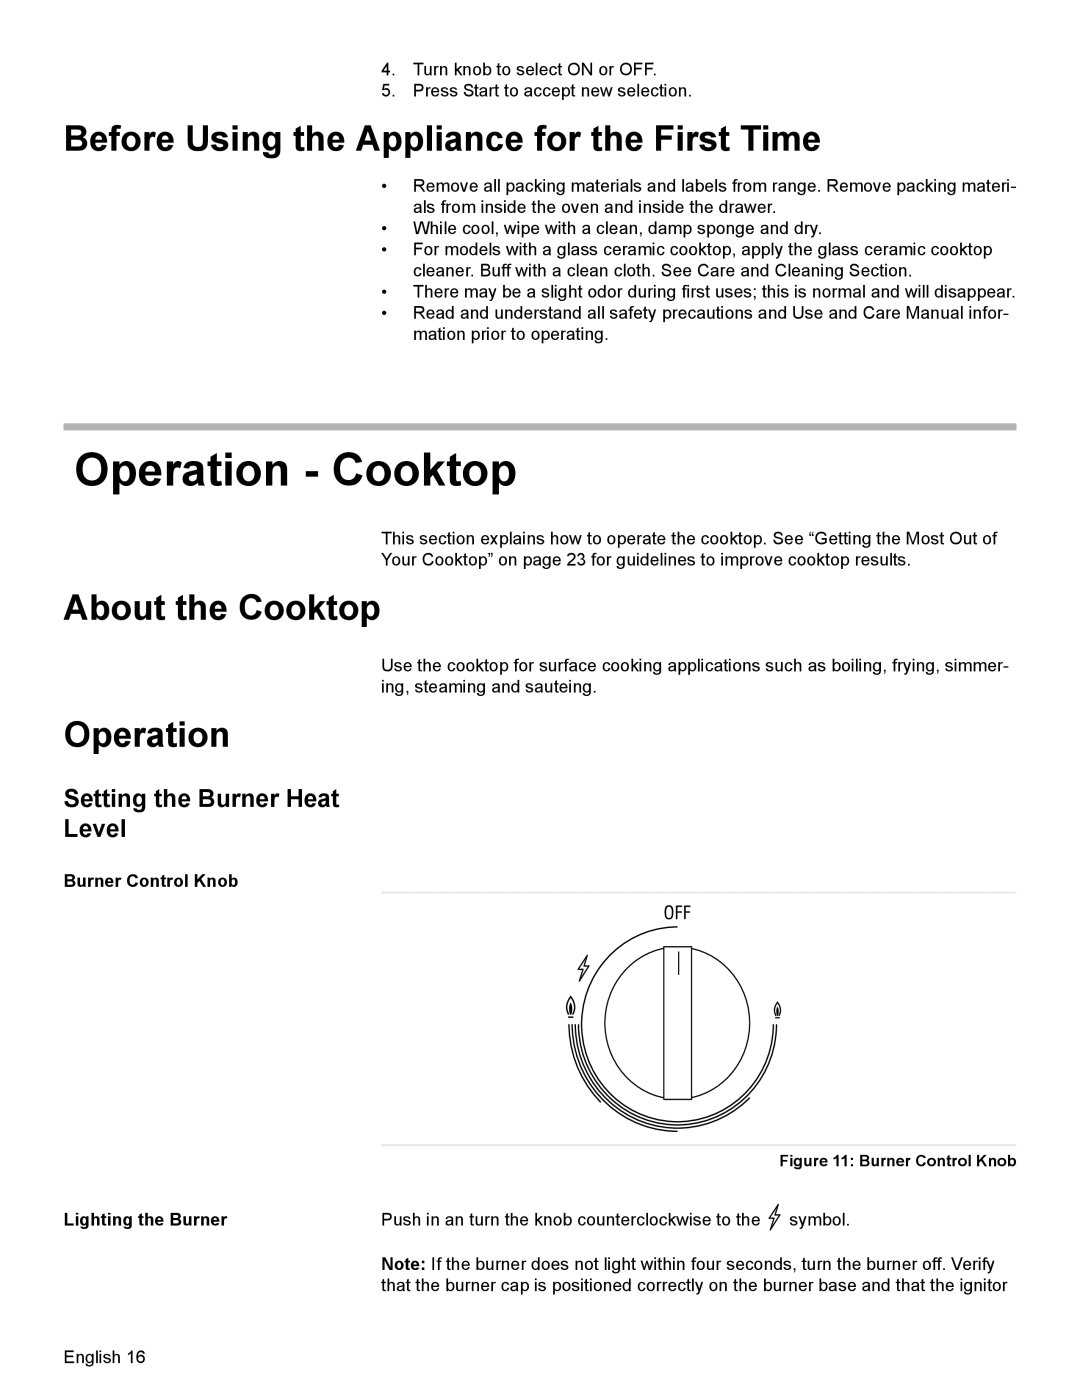 Bosch Appliances HGS7282UC manual Operation - Cooktop, Before Using the Appliance for the First Time, About the Cooktop 